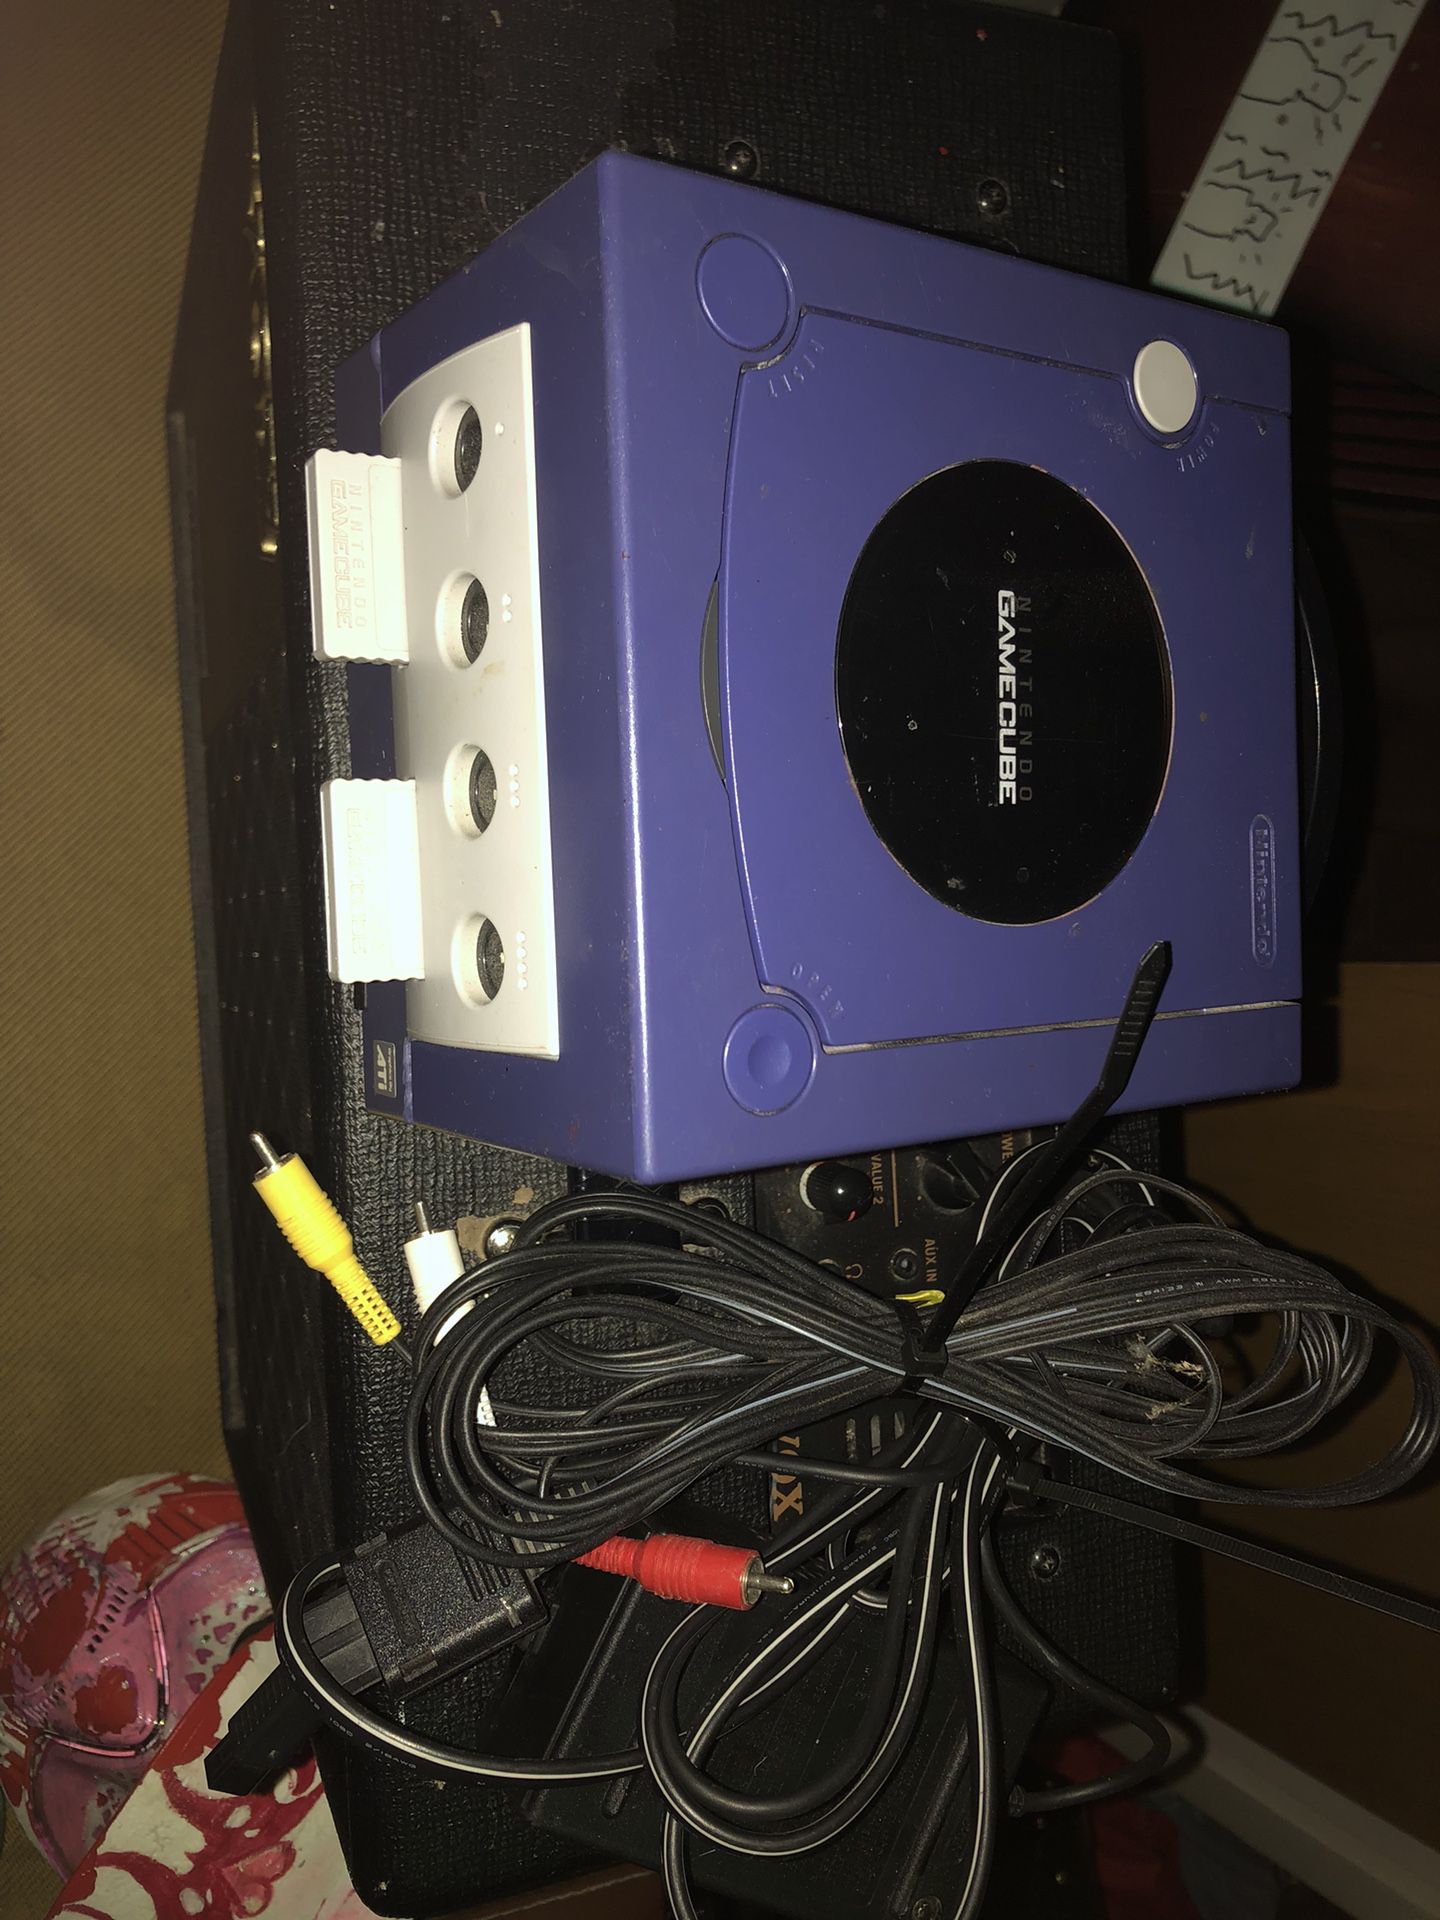 GameCube With Oem Cords And Memory Cards